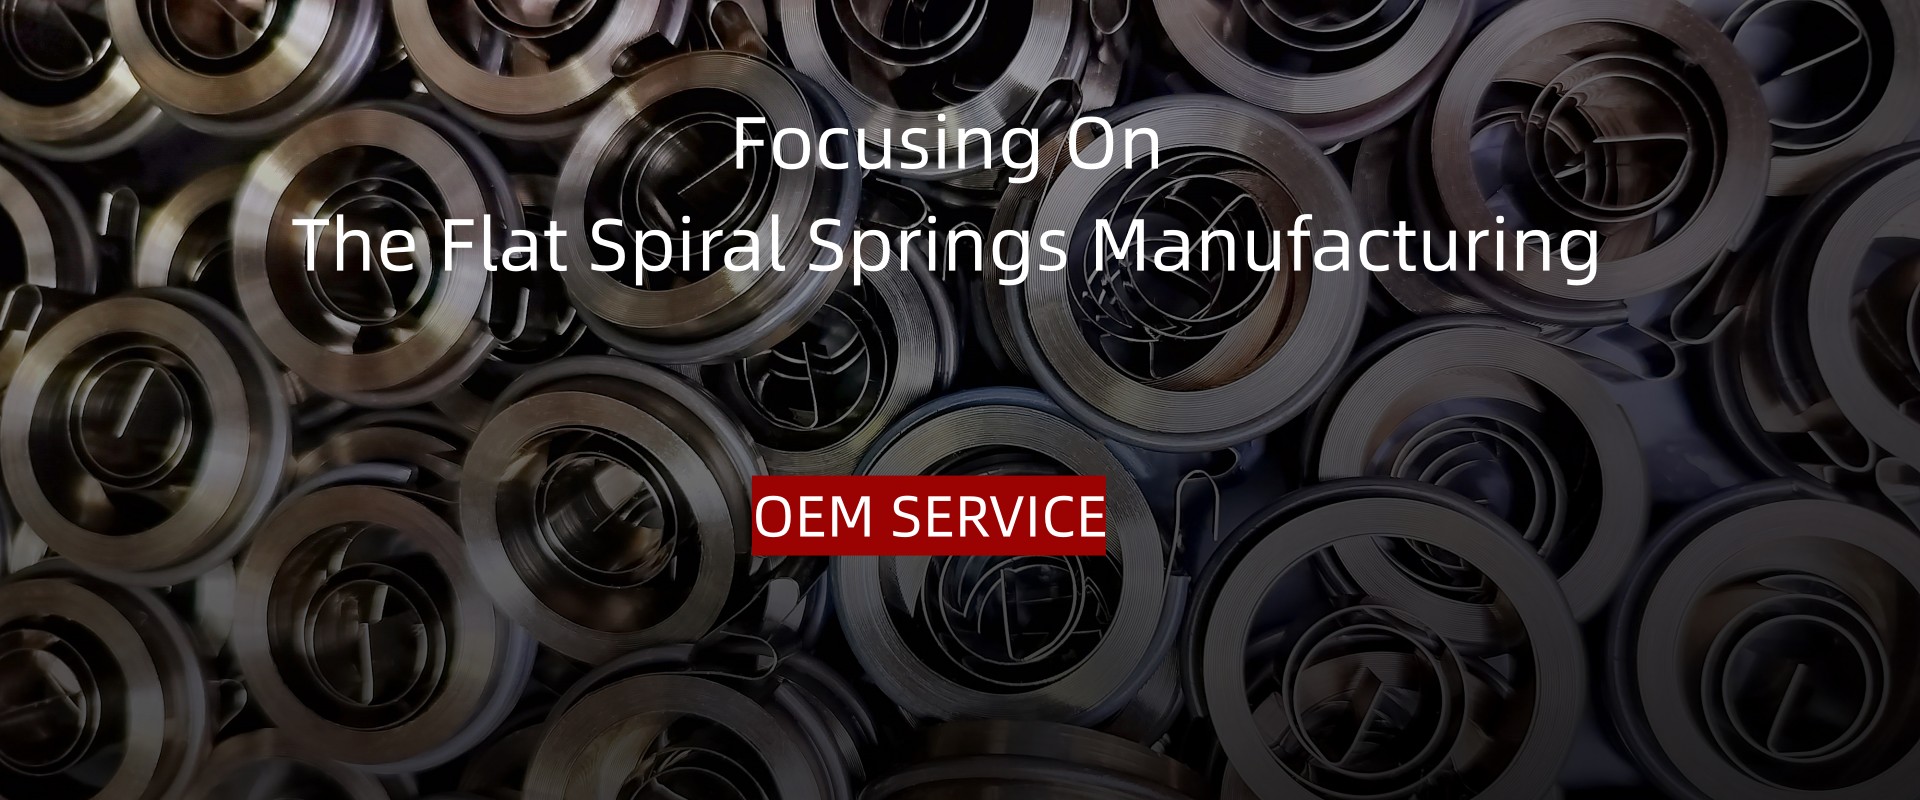 Weihui Spring is a professional flat spiral springs Manufacturer, and provide ODM/OEM service for our clients. 